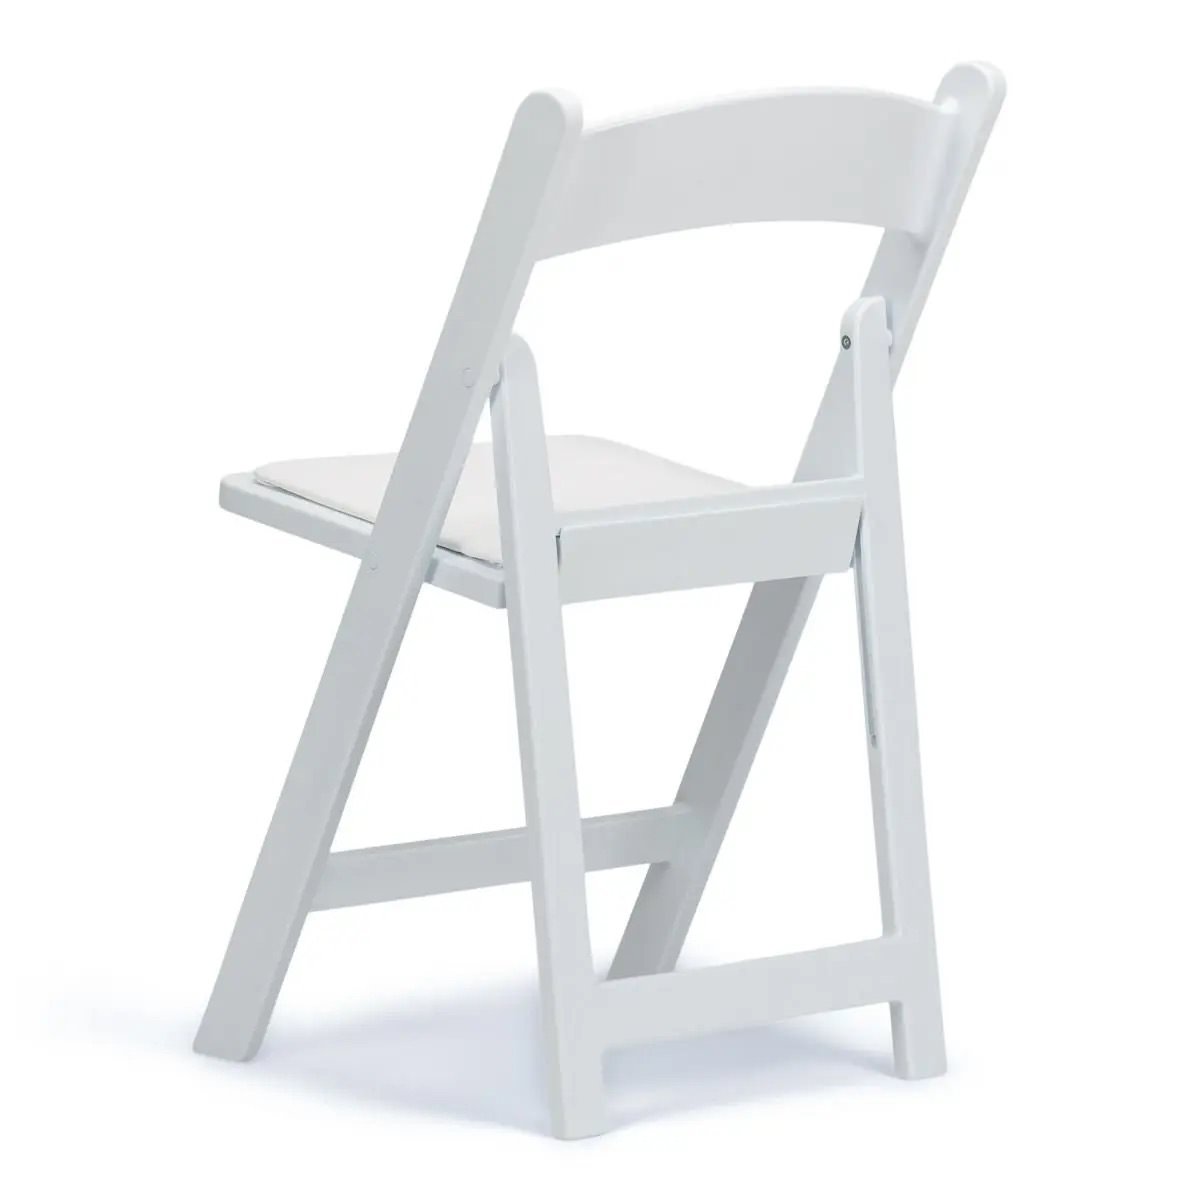 white-resin-folding-chairs-with-padded-seat-hughes-event-rentals-charleston-sc1.jpeg